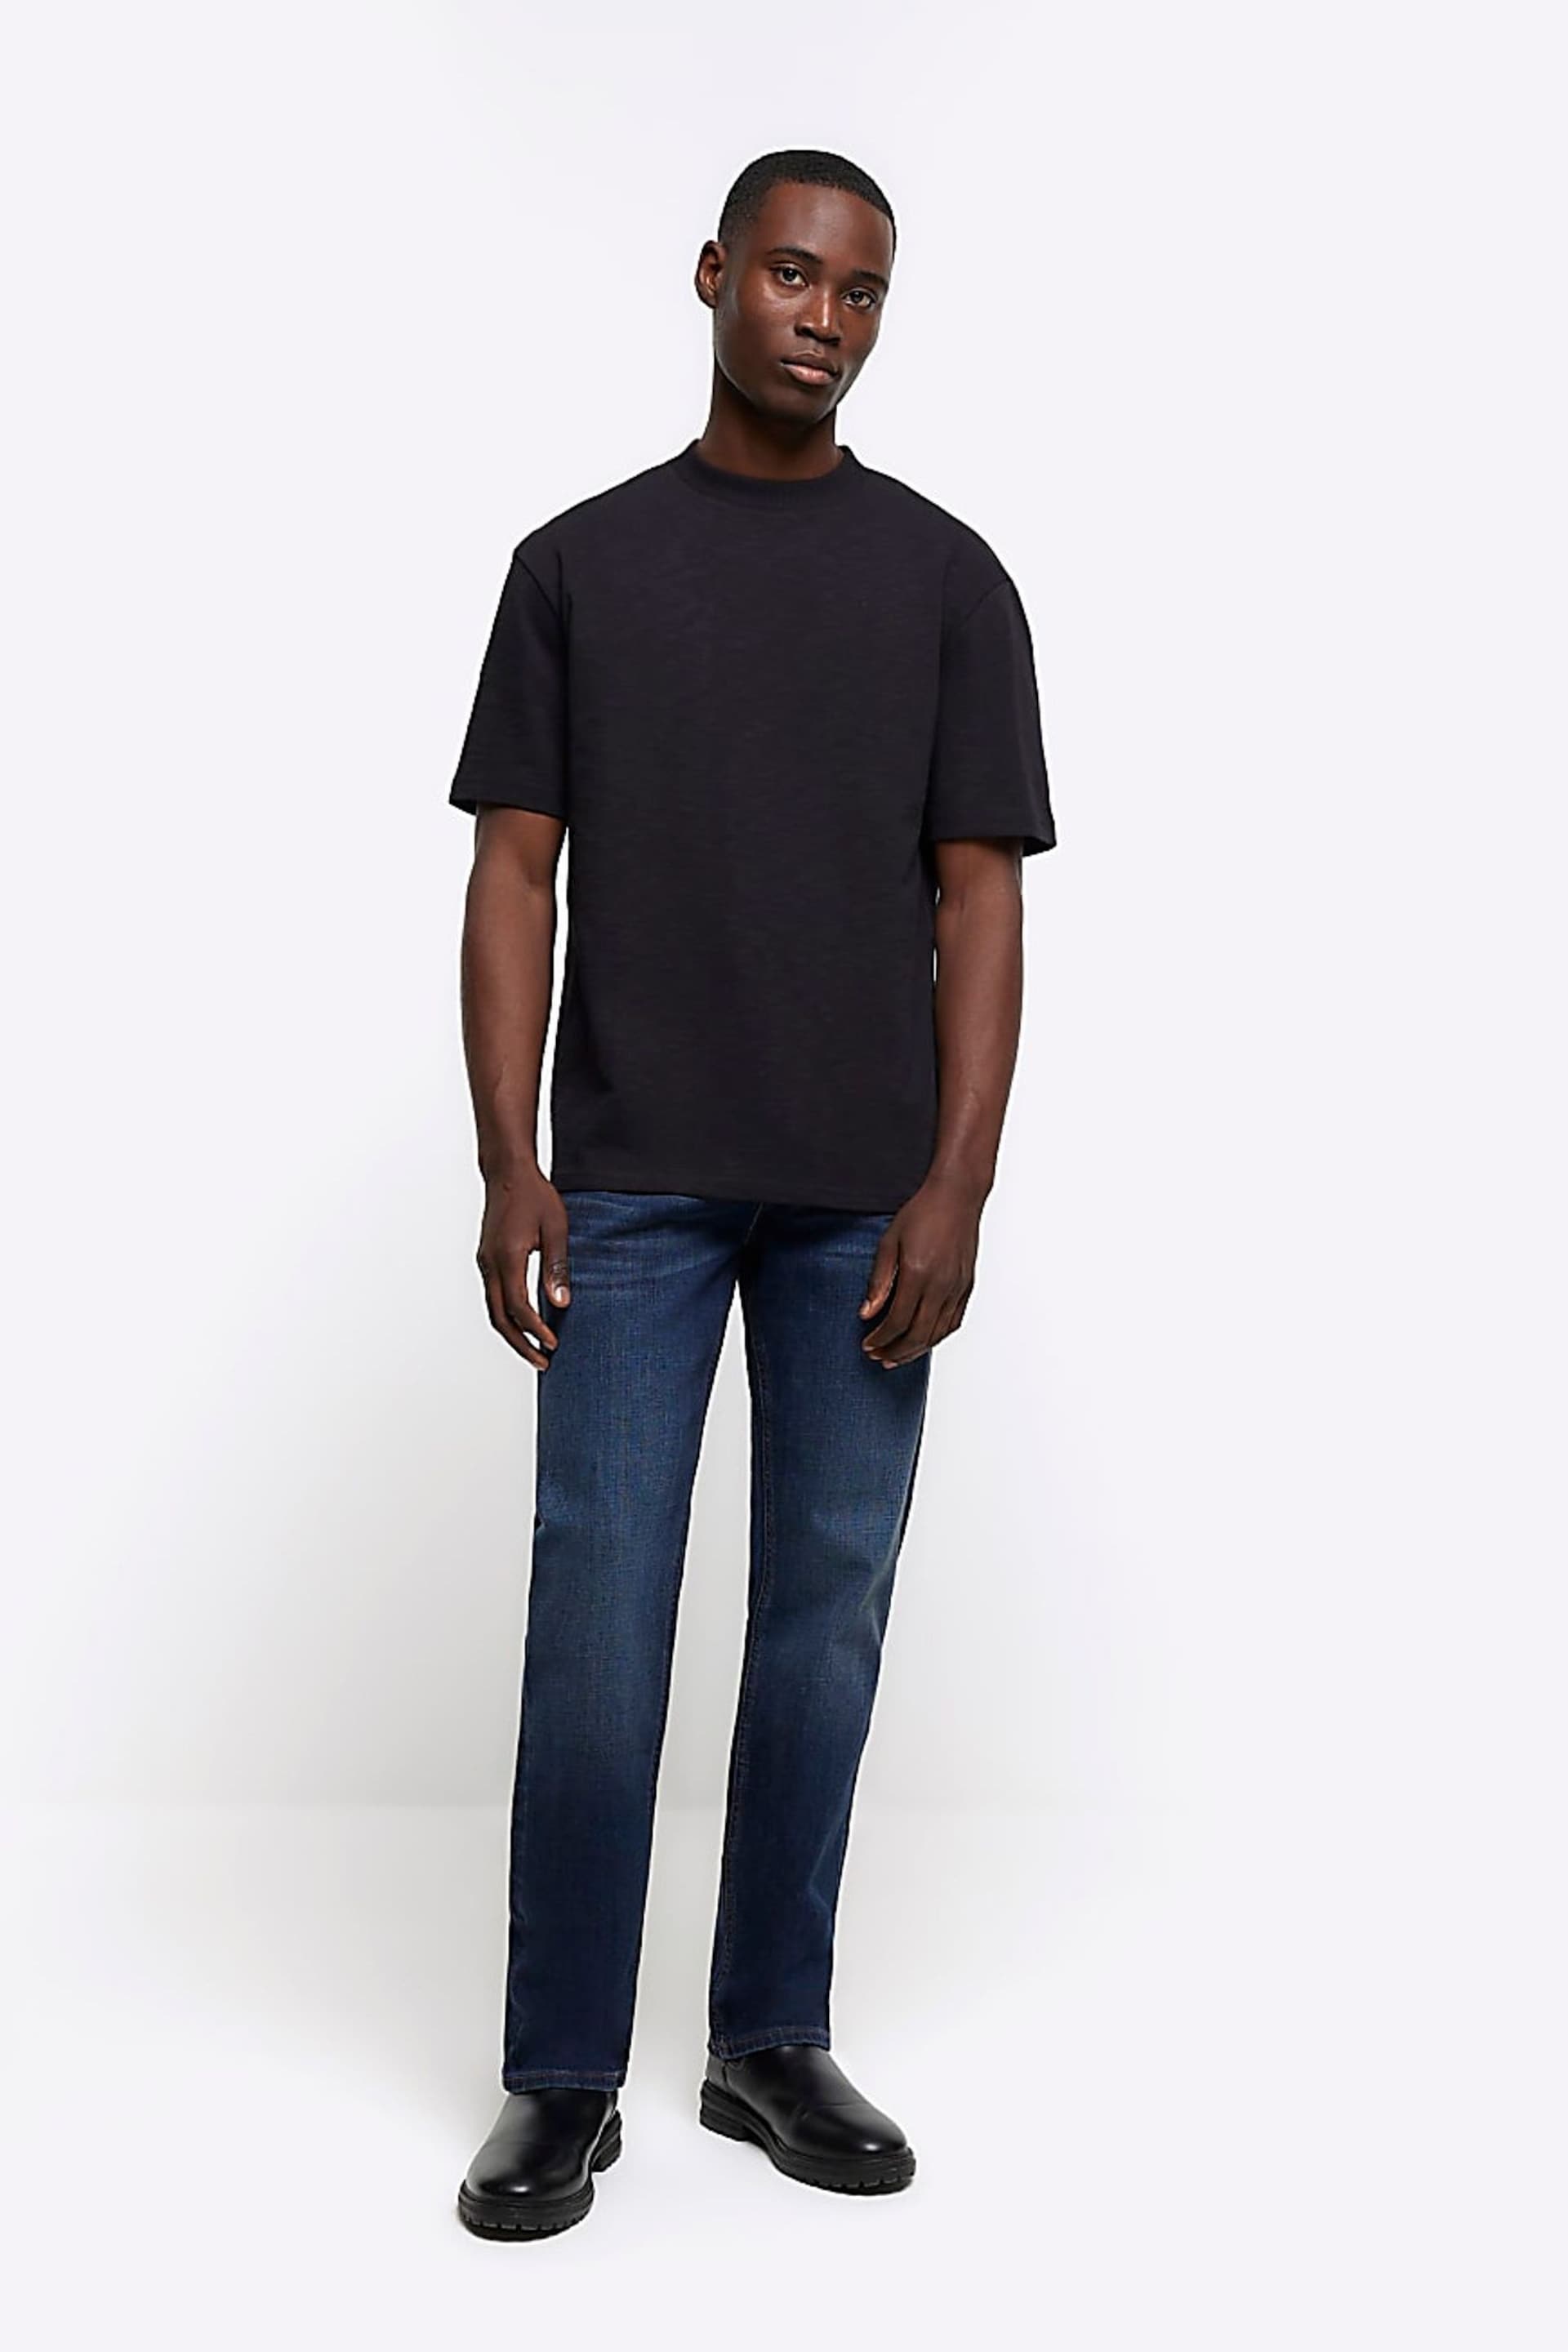 River Island Blue Straight Fit Jeans - Image 3 of 4